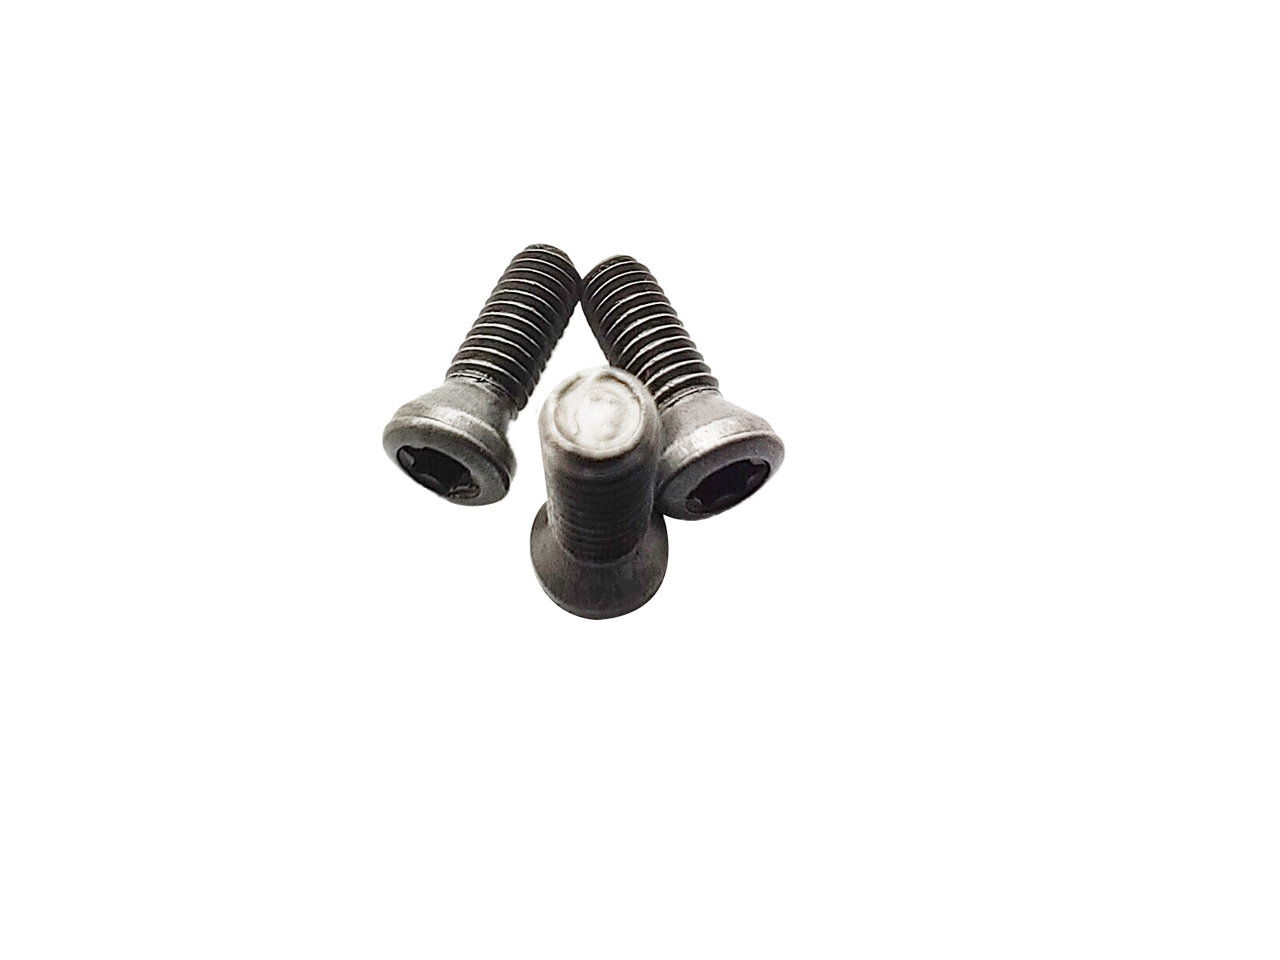 Ultra Precision Screw 4mm x 12mm long Pack of 10 nos.